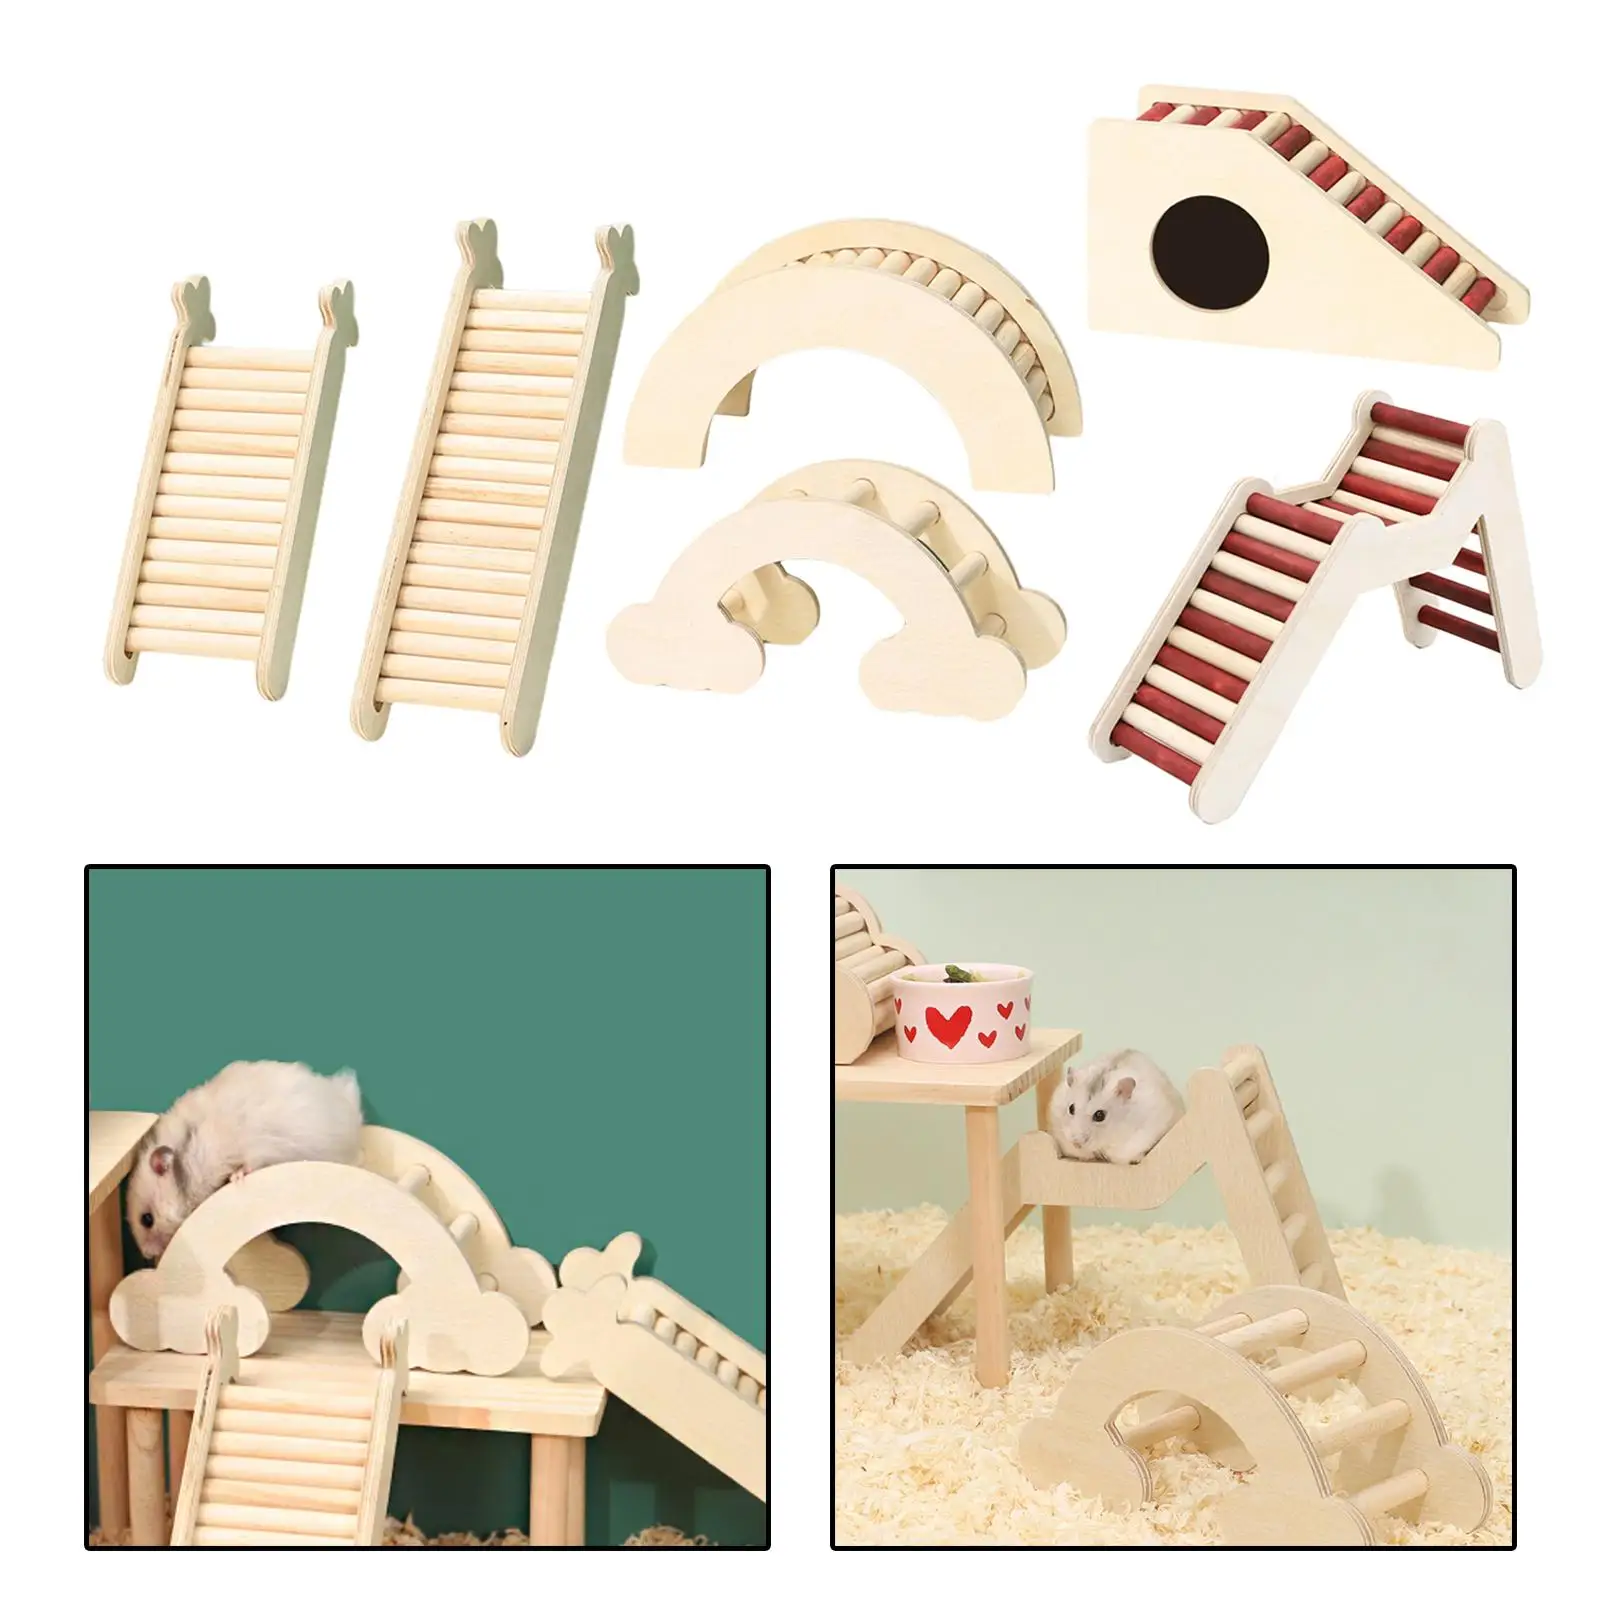 Hamster Climbing Toy Wooden Bridge Ladder for Hamsters Gerbils Mice and Small Animals